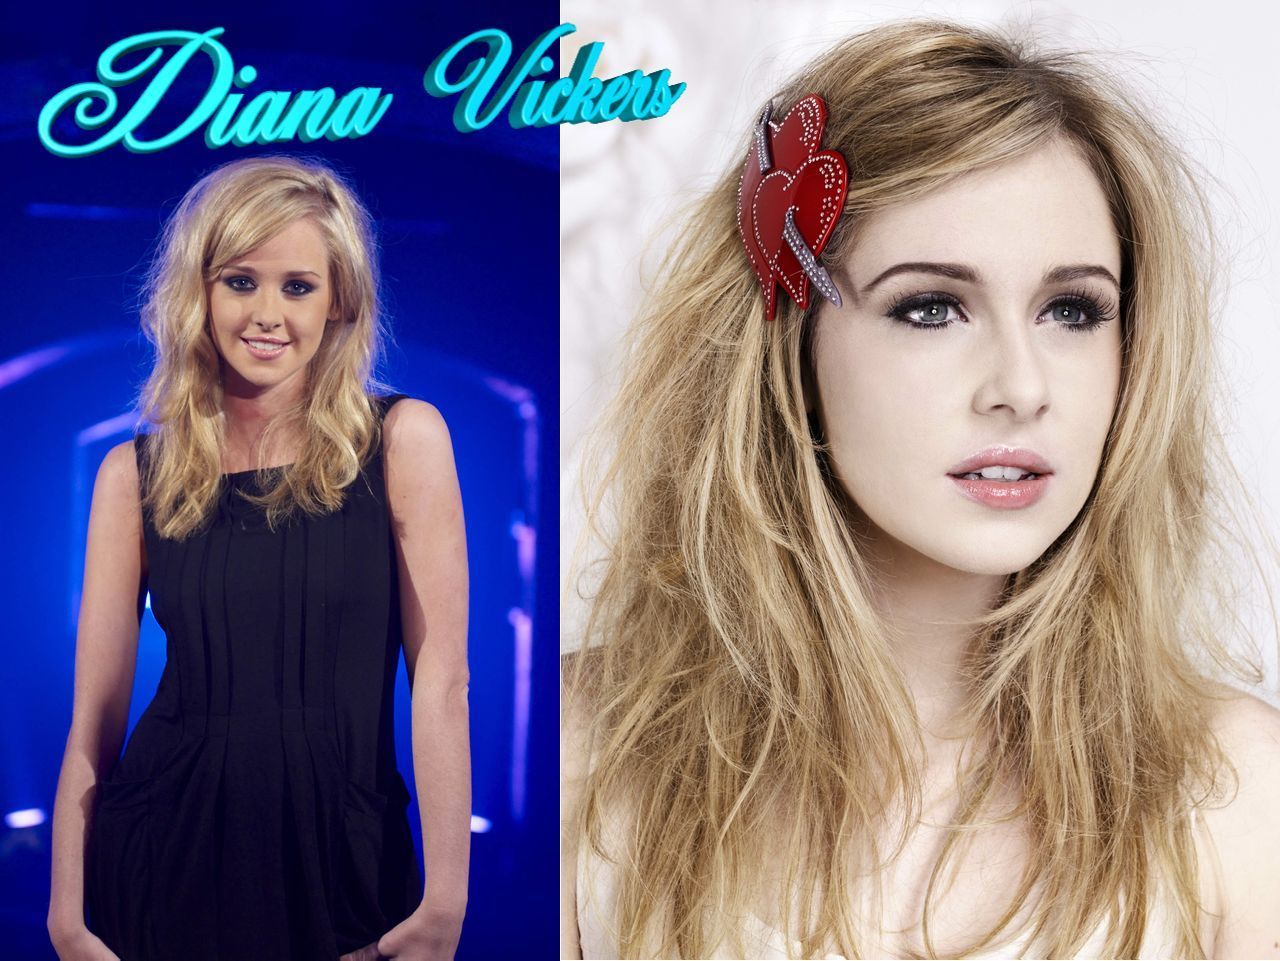 Diana Vickers - Photo Colection